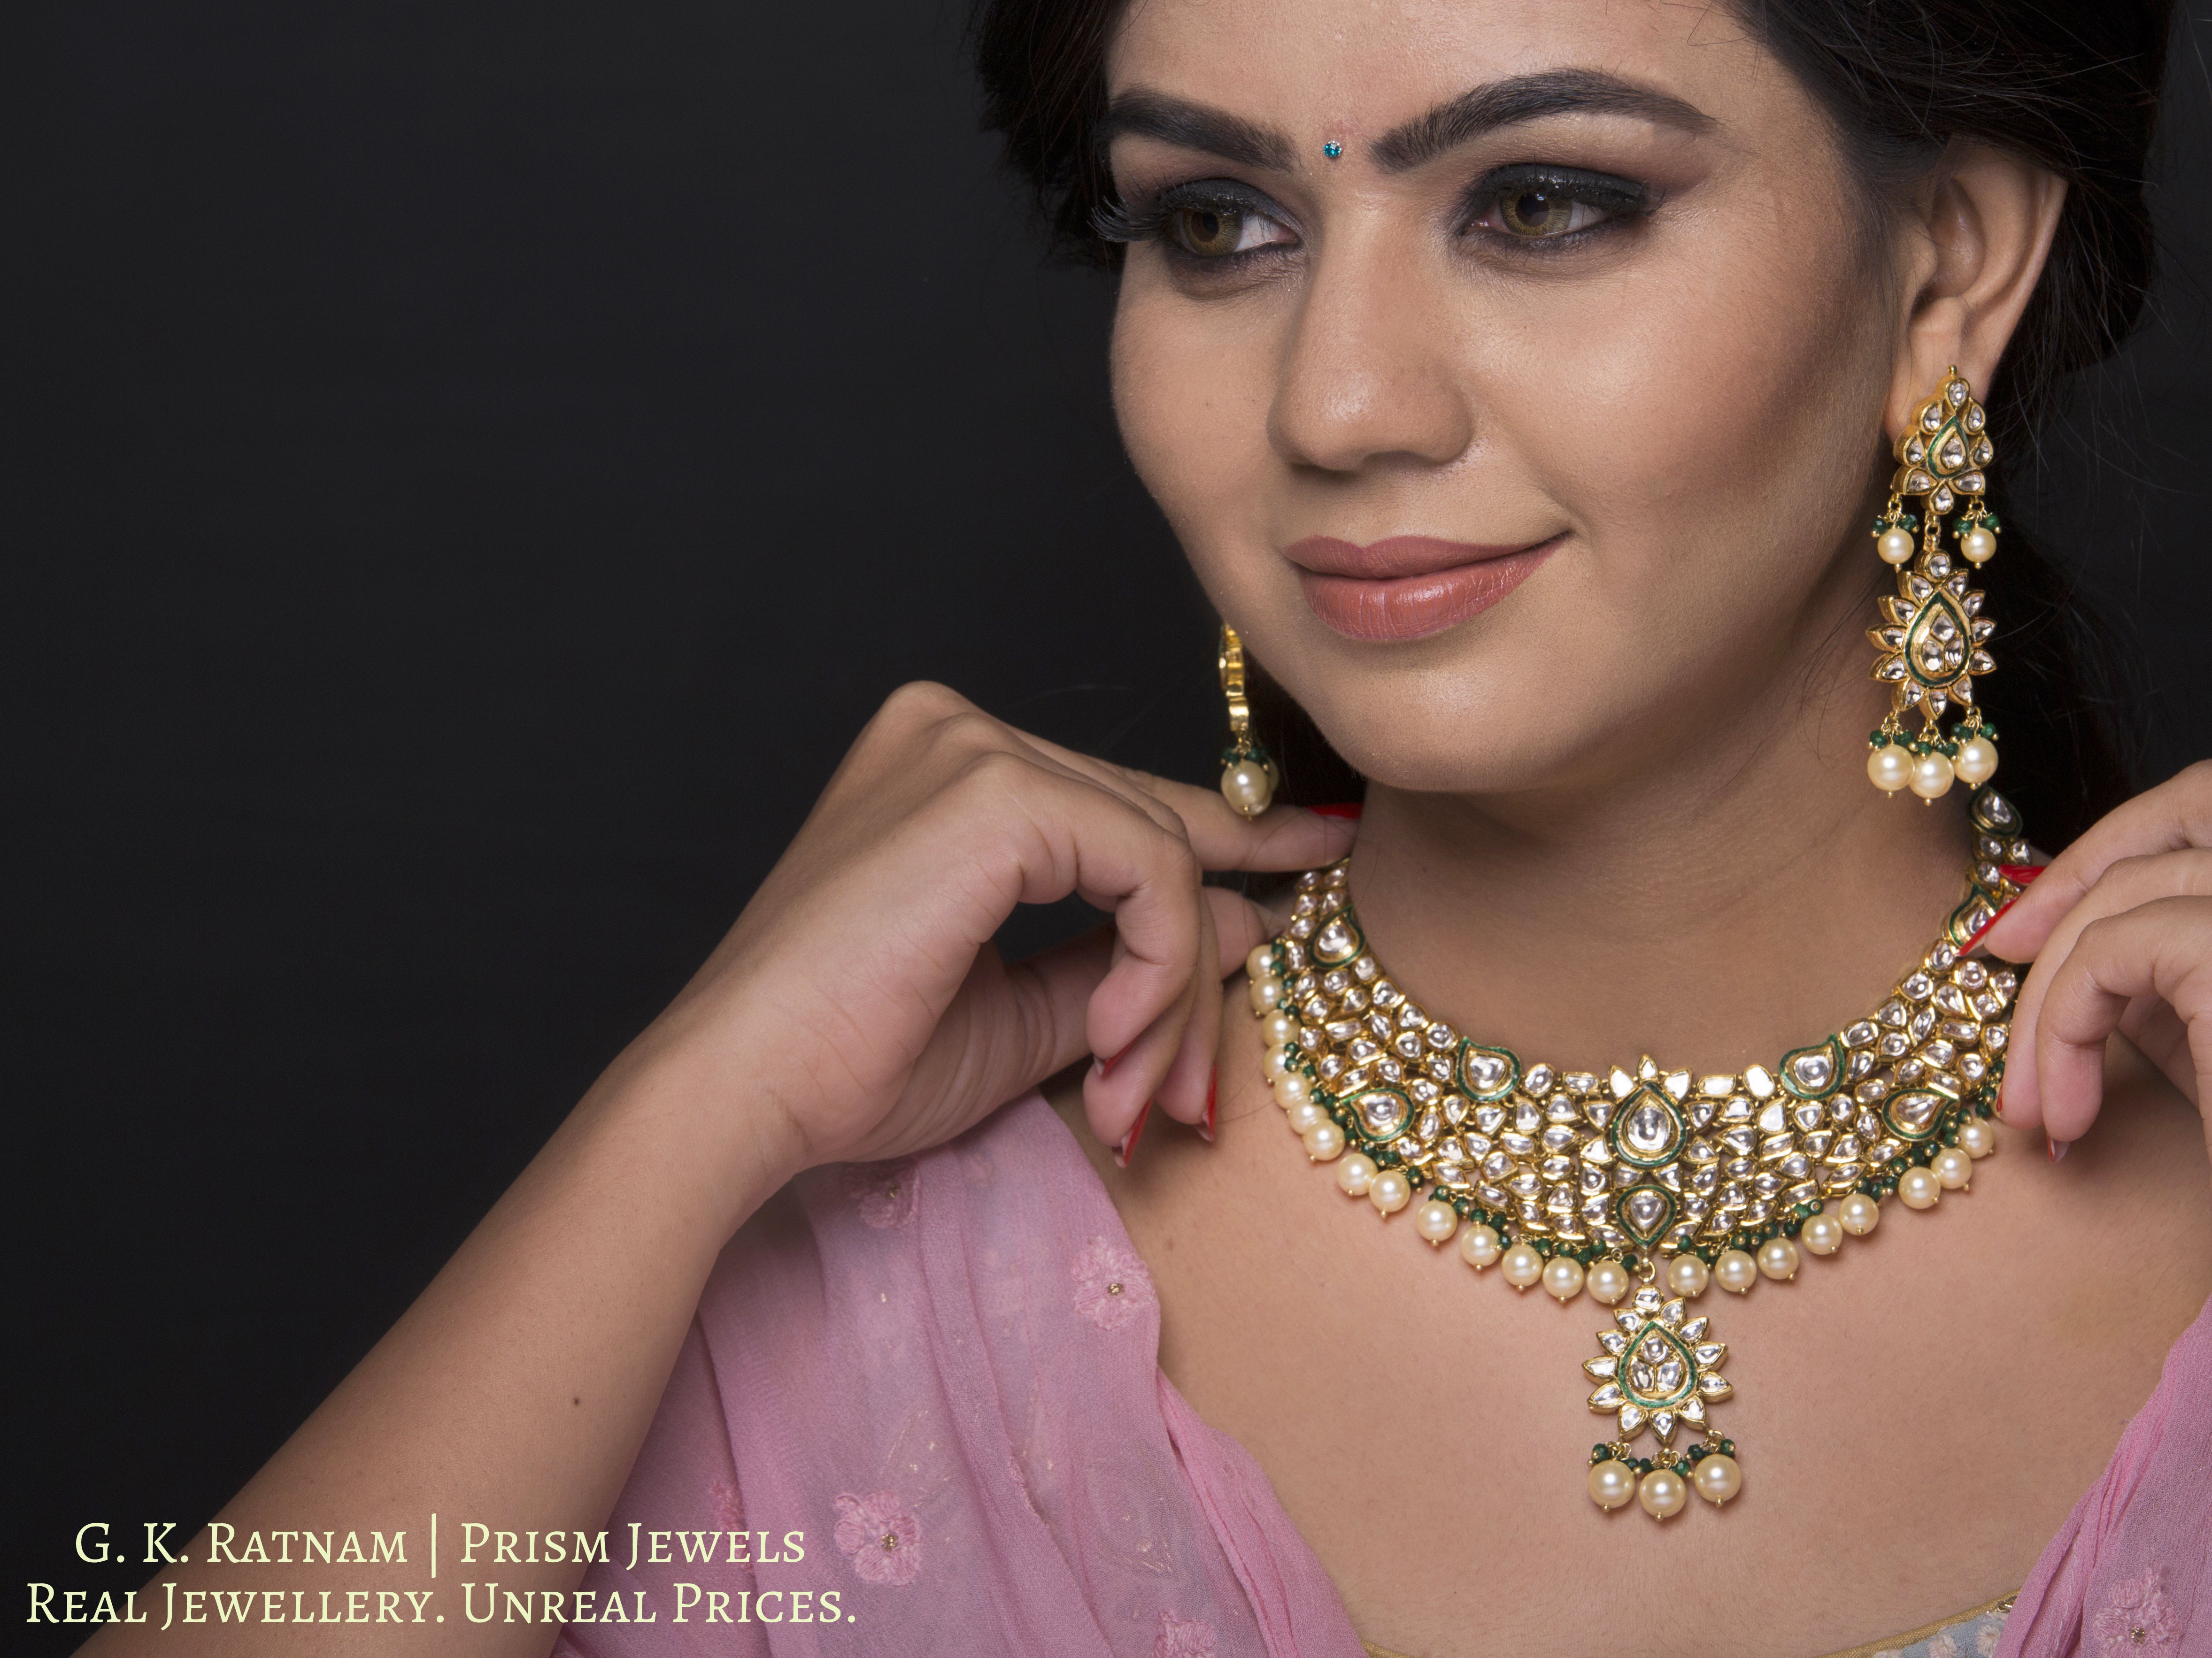 Traditional Gold and Diamond Polki green enamel Necklace Set with shiny pearls and a hint of green - gold diamond polki kundan meena jadau jewellery